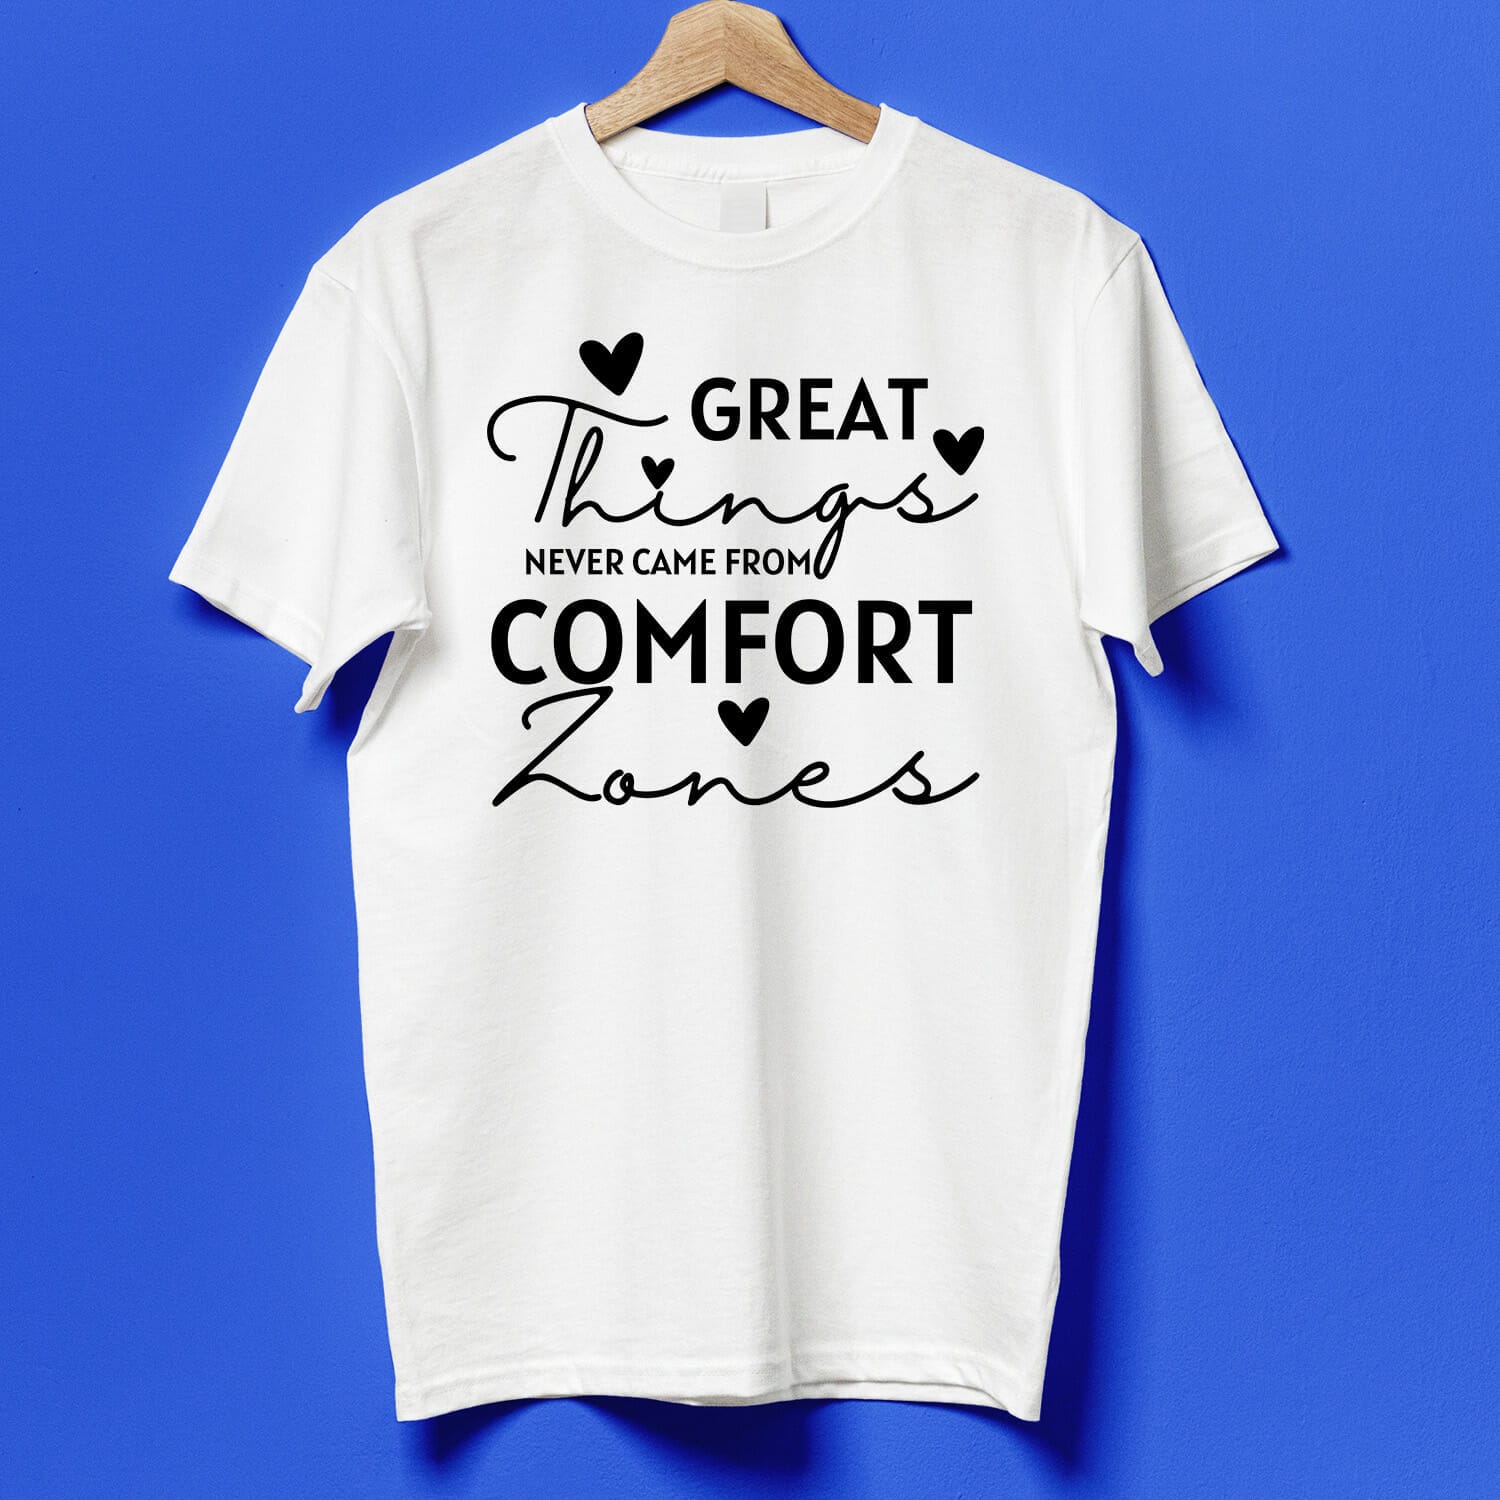 Great things never came from comfort zones Motivational T-shirt Design